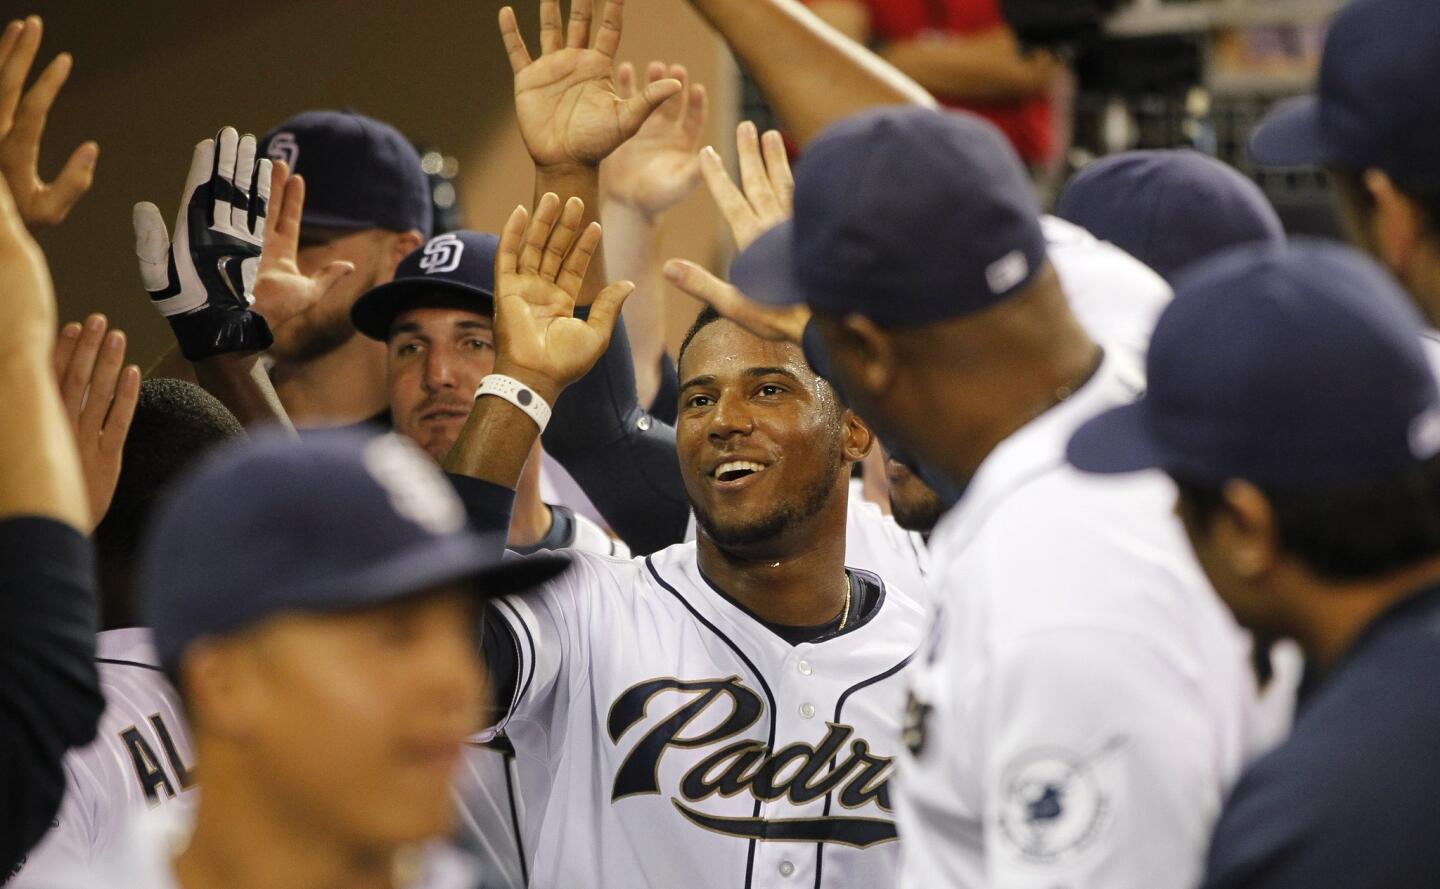 The Padres' Rymer Liriano is congratulated in the dugout after scoring in the fourth inning.